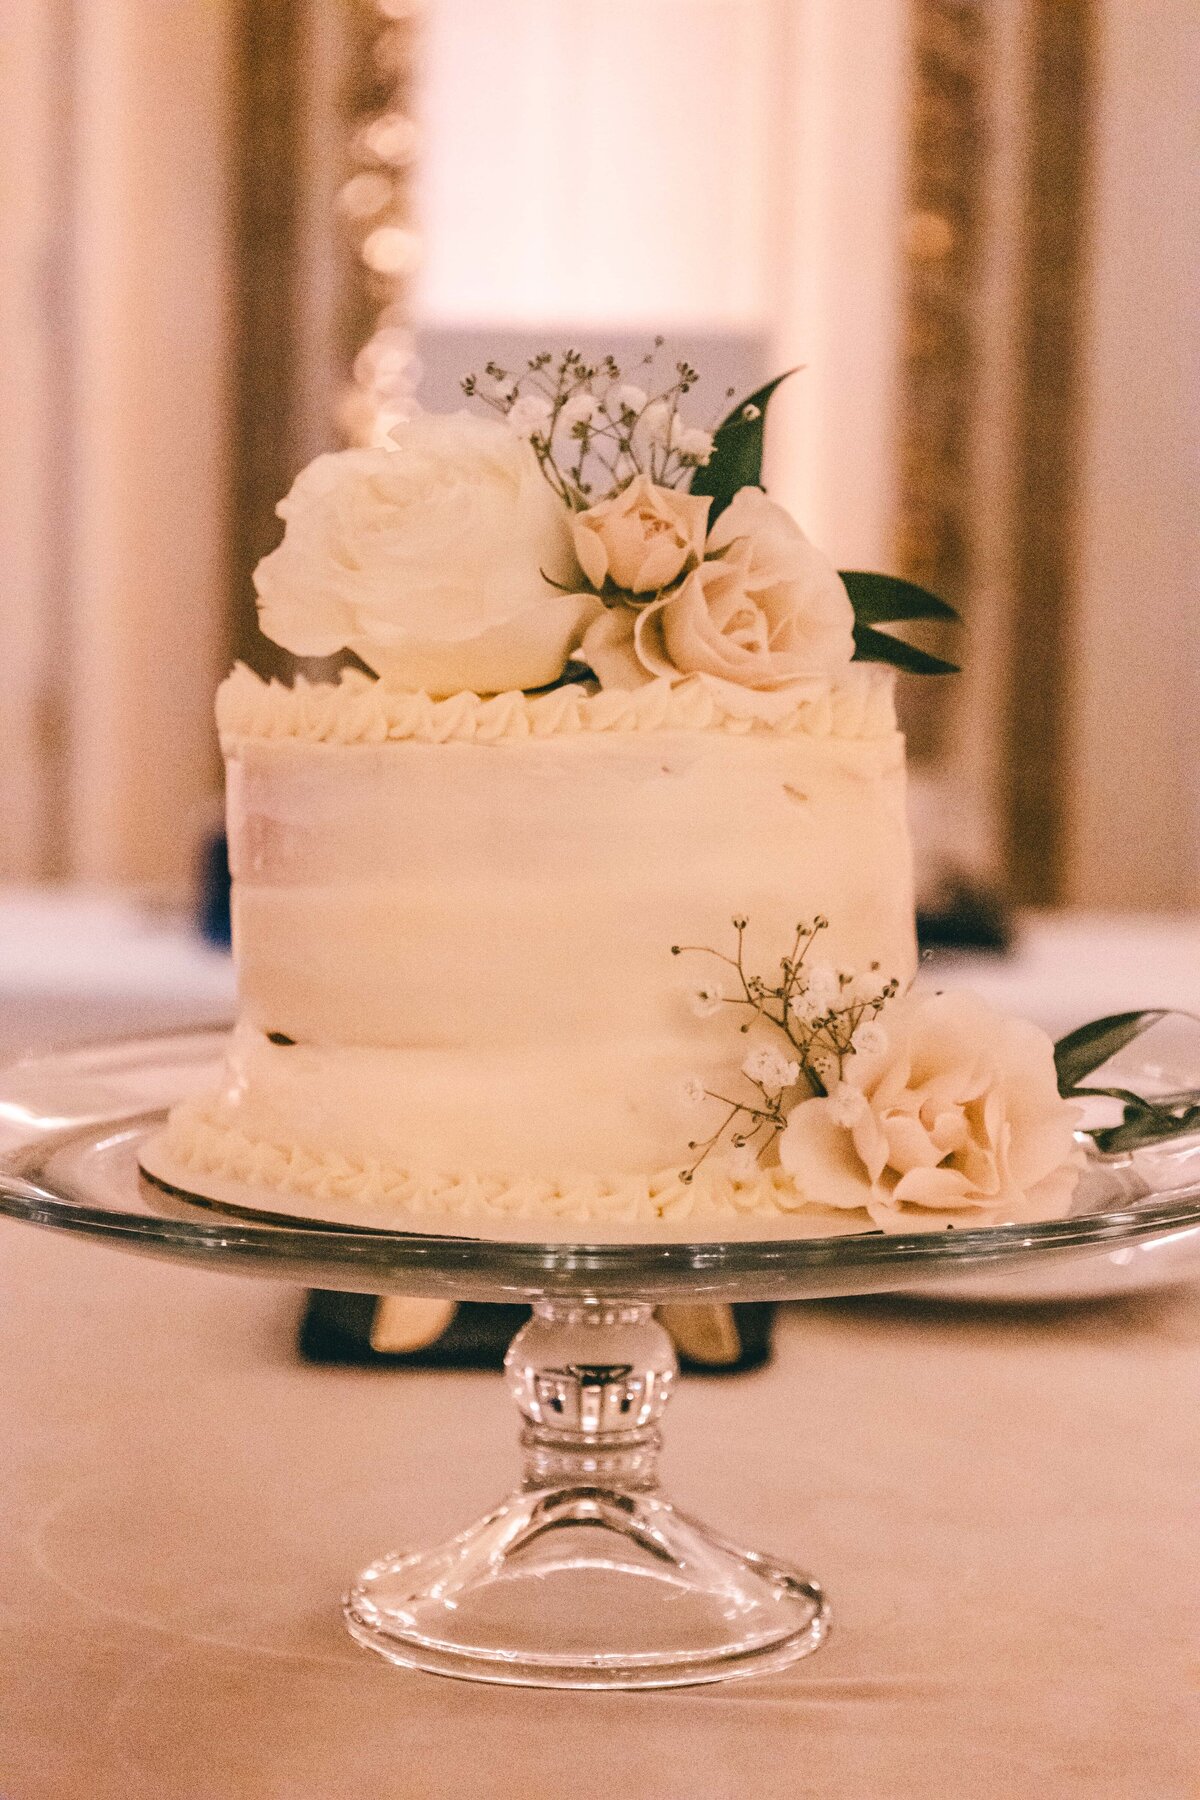 A two-tiered wedding cake adorned with white roses and small flowers on a glass cake stand, set in a dimly lit room at a park farm winery wedding.